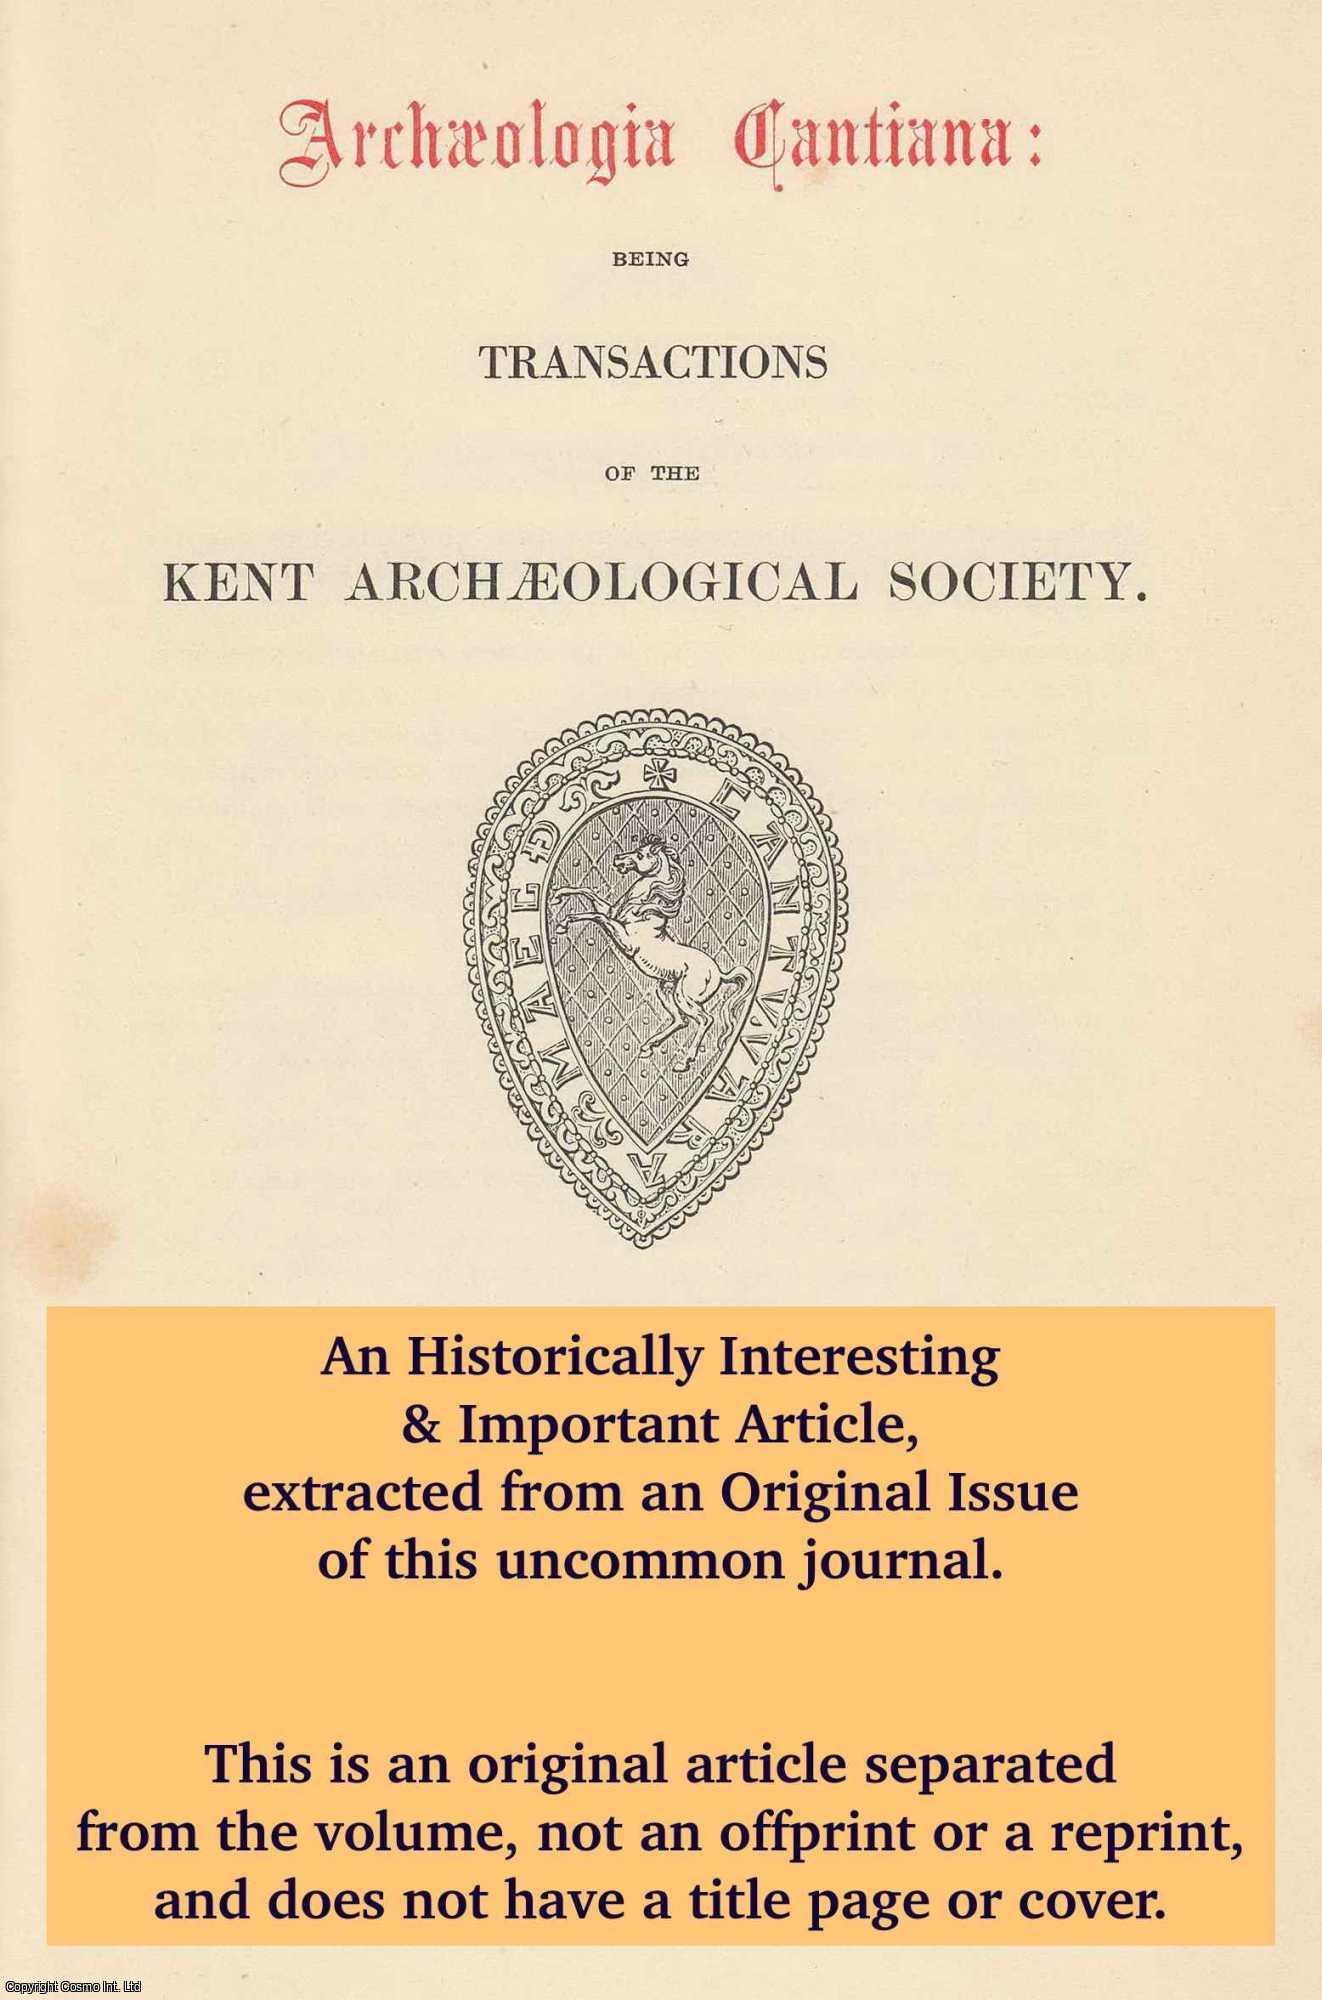 Grevile M. Livett - Queningate and The Walls of Durovernum. An original article from The Archaeologia Cantiana: Transactions of The Kent Archaeological Society, 1933.